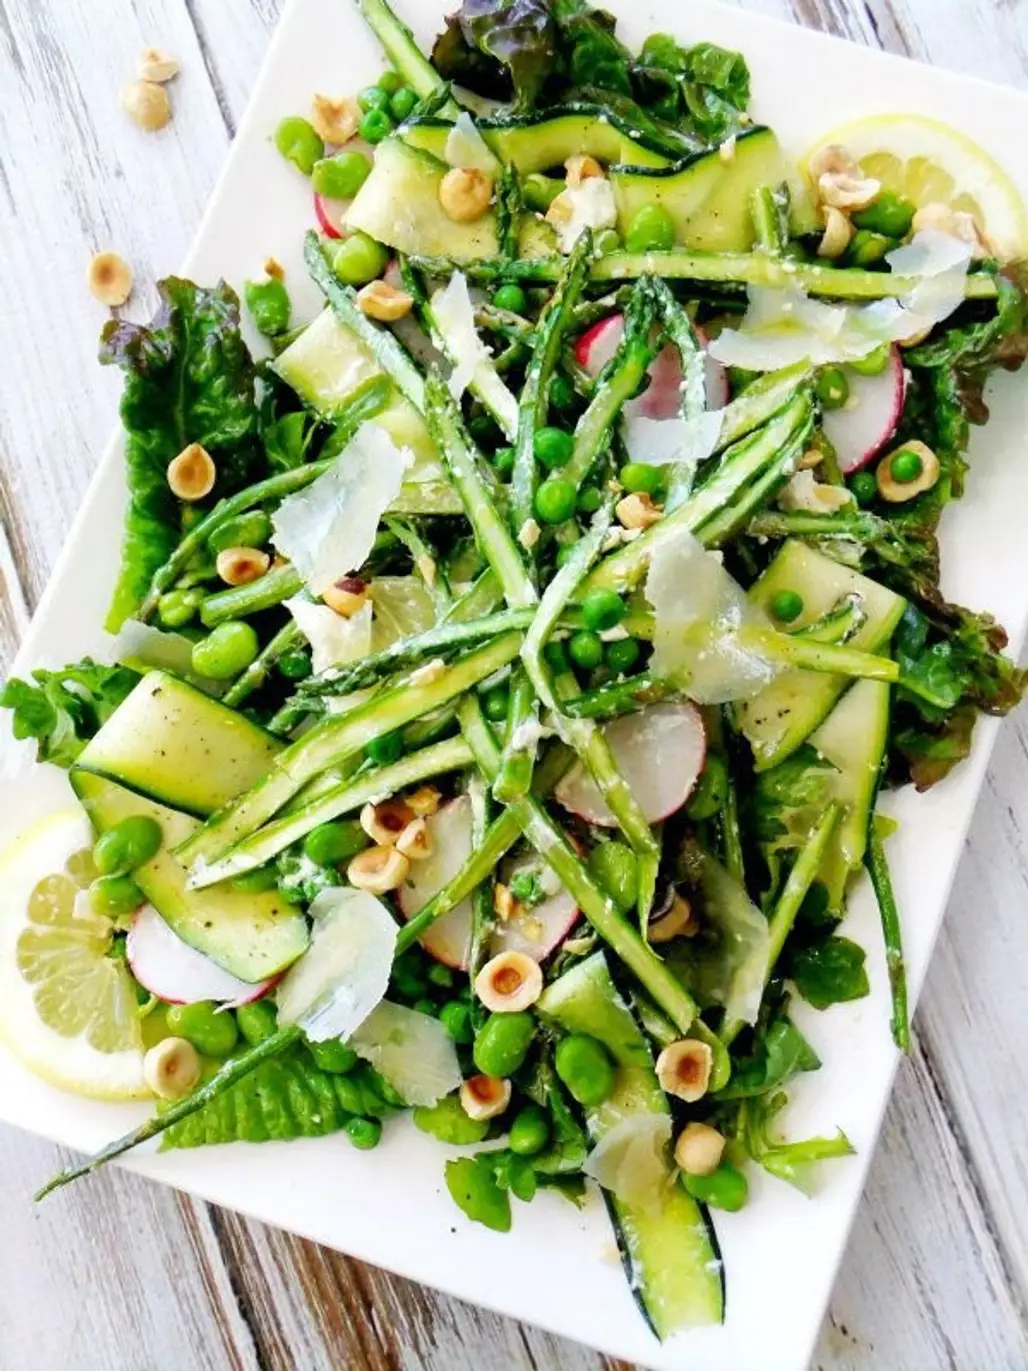 Spring Salad with Asparagus, Goat Cheese, Lemon and Hazelnuts